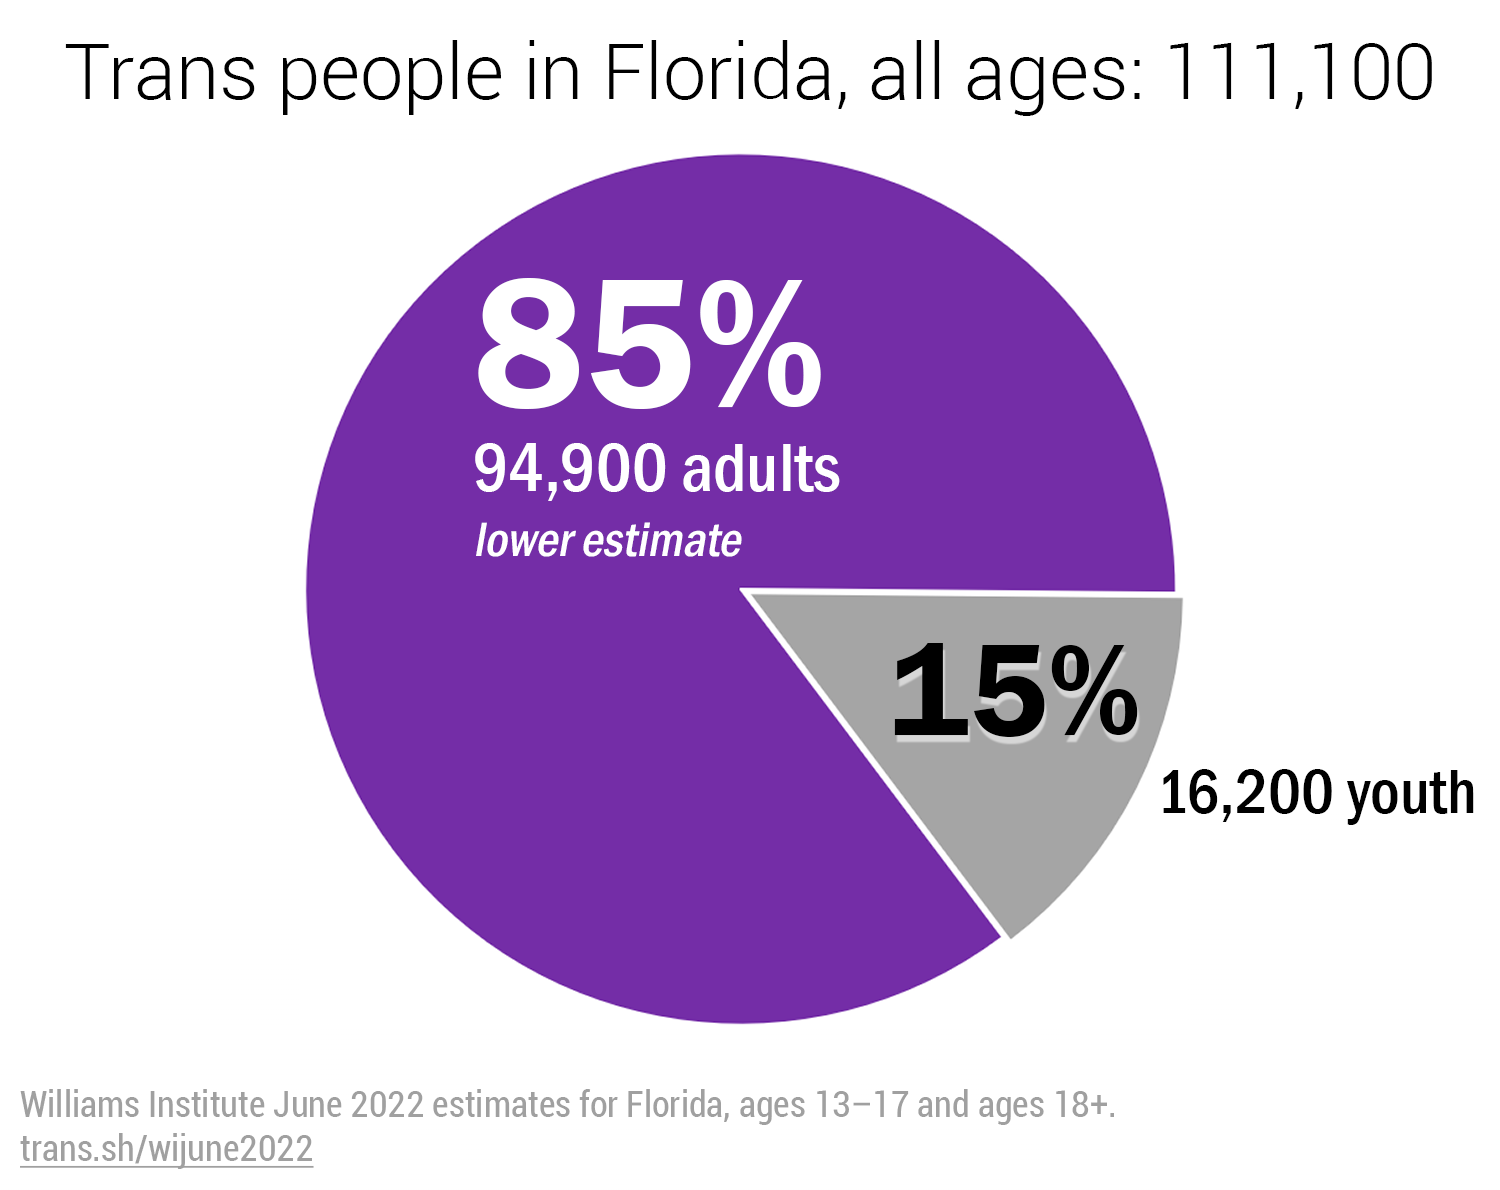 Trans people in Florida, all ages 13+: 111,100. Trans adults: 94,900 (85%) (lower estimate). Trans youth: 16,200 (15%). Williams Institute June 2022 estimates for Florida, ages 13-17 and ages 18+. https://trans.sh/wijune2022